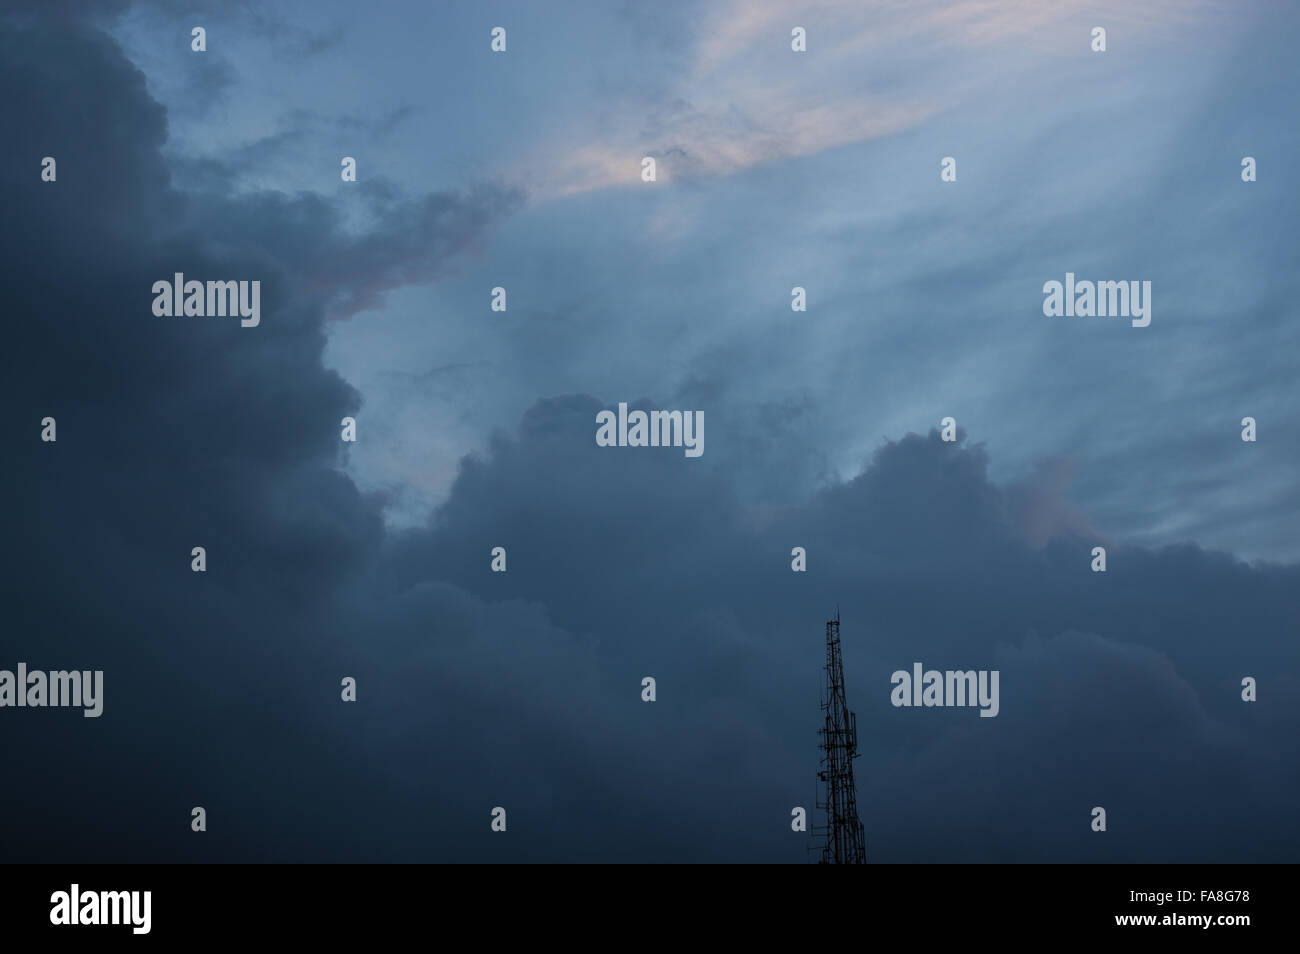 Clouds in a dark blue sky with the silhouette of a radio antenna. Stock Photo